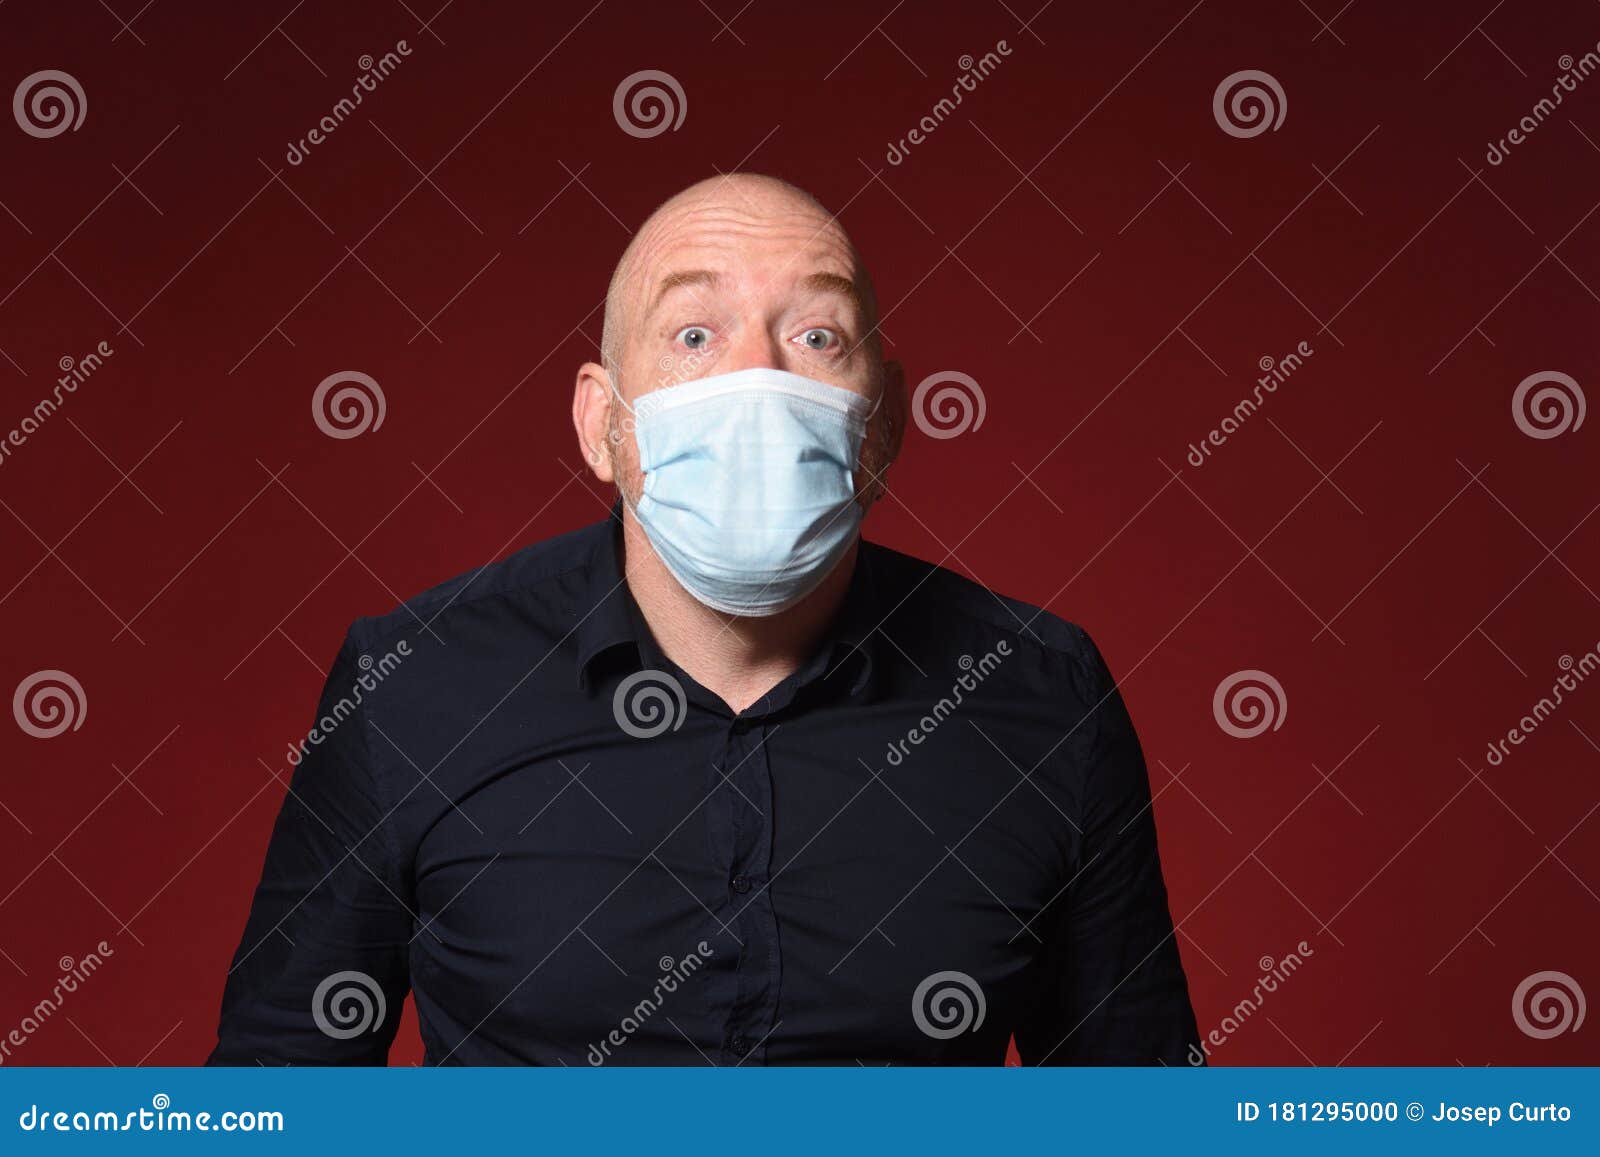 man with medical mask expresion surprise on red background